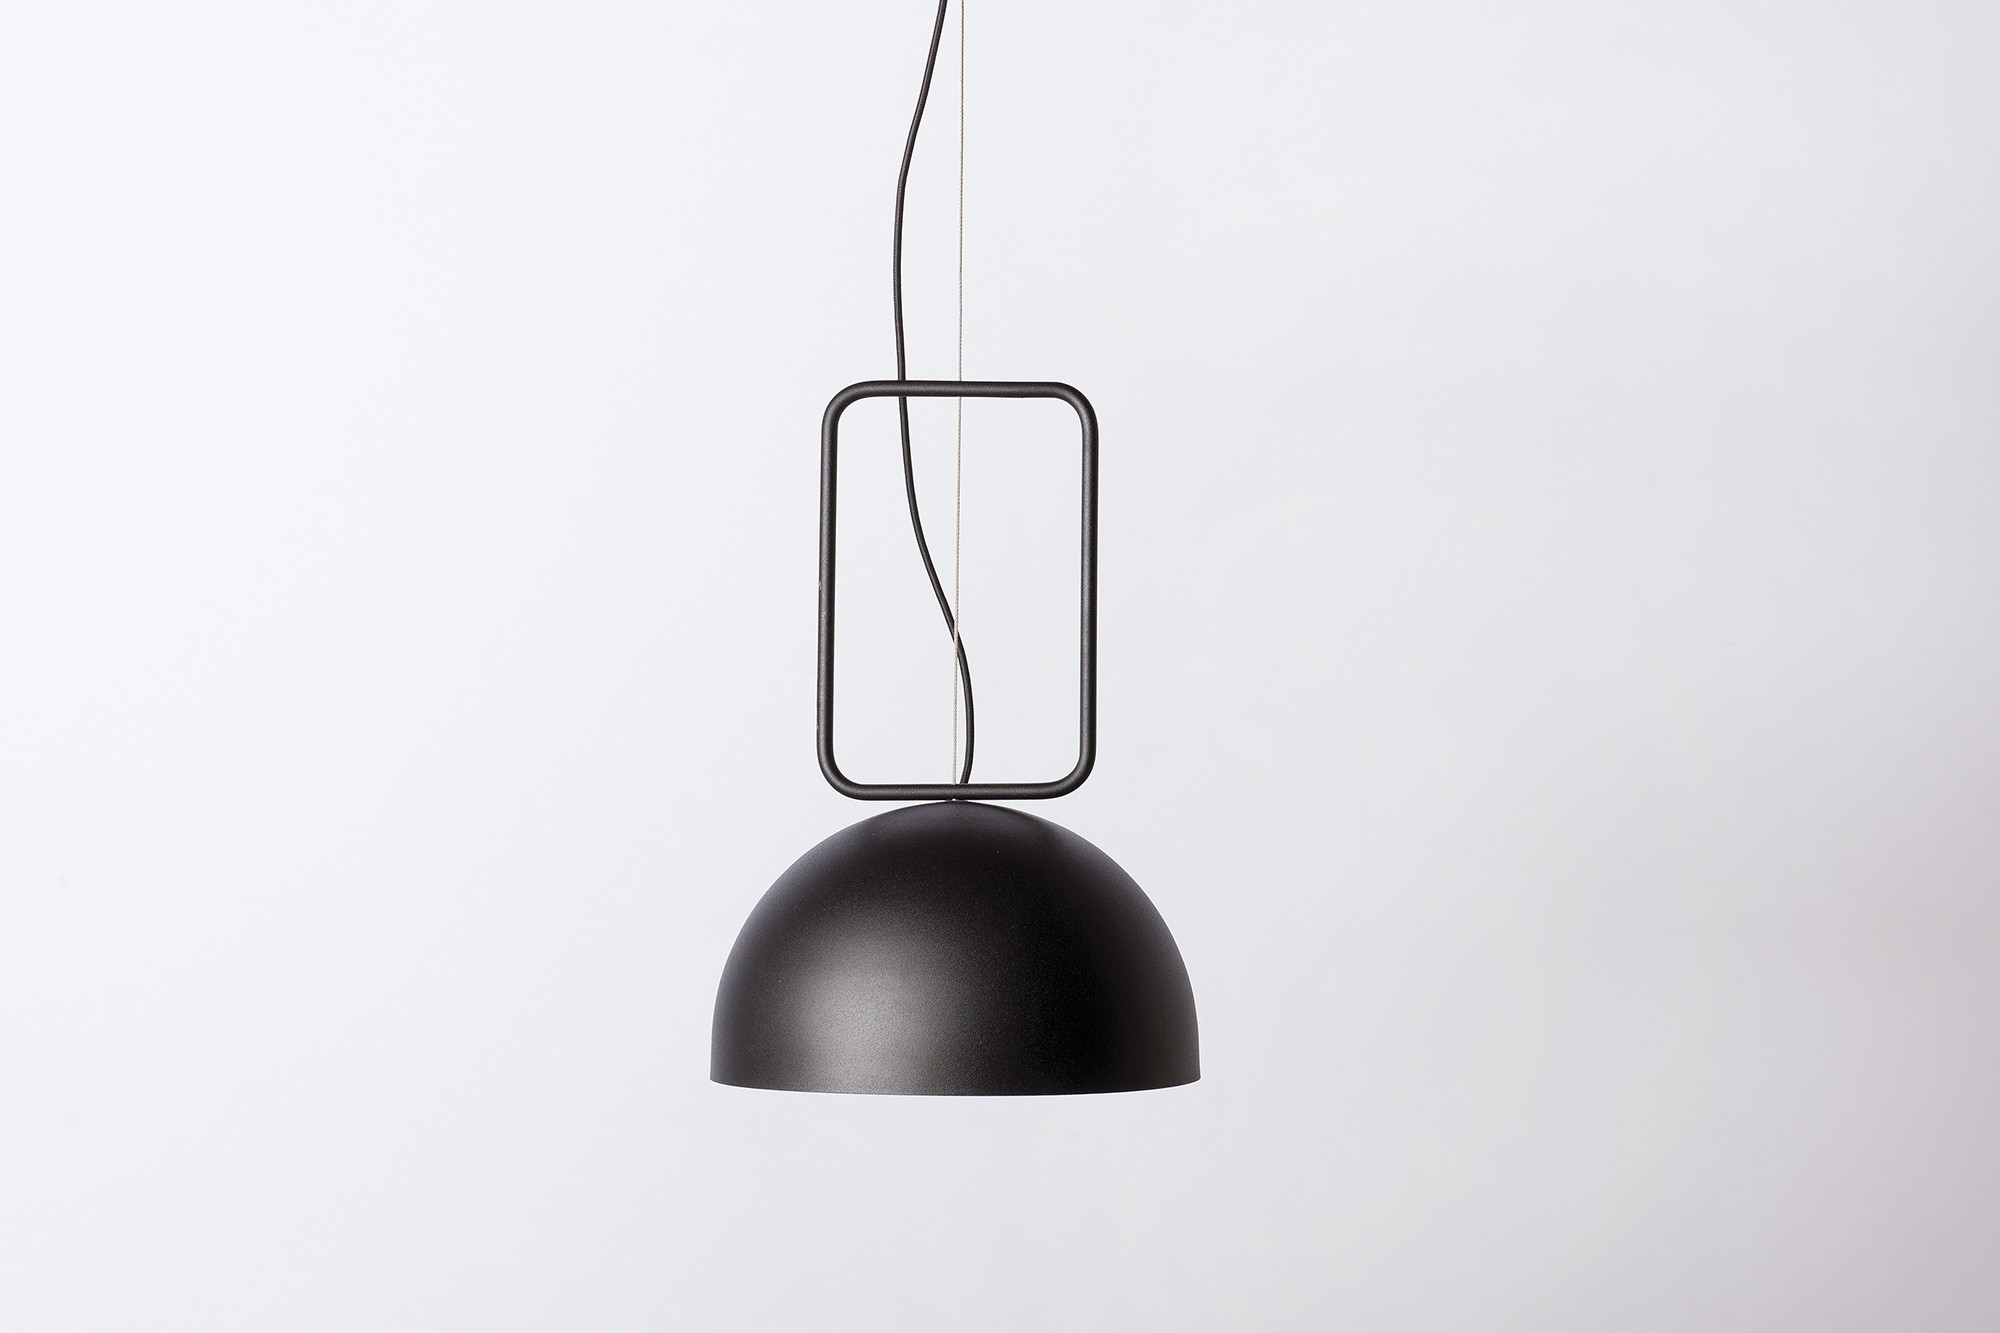 King Dome Lamps by Dowel Jones for Woodmark